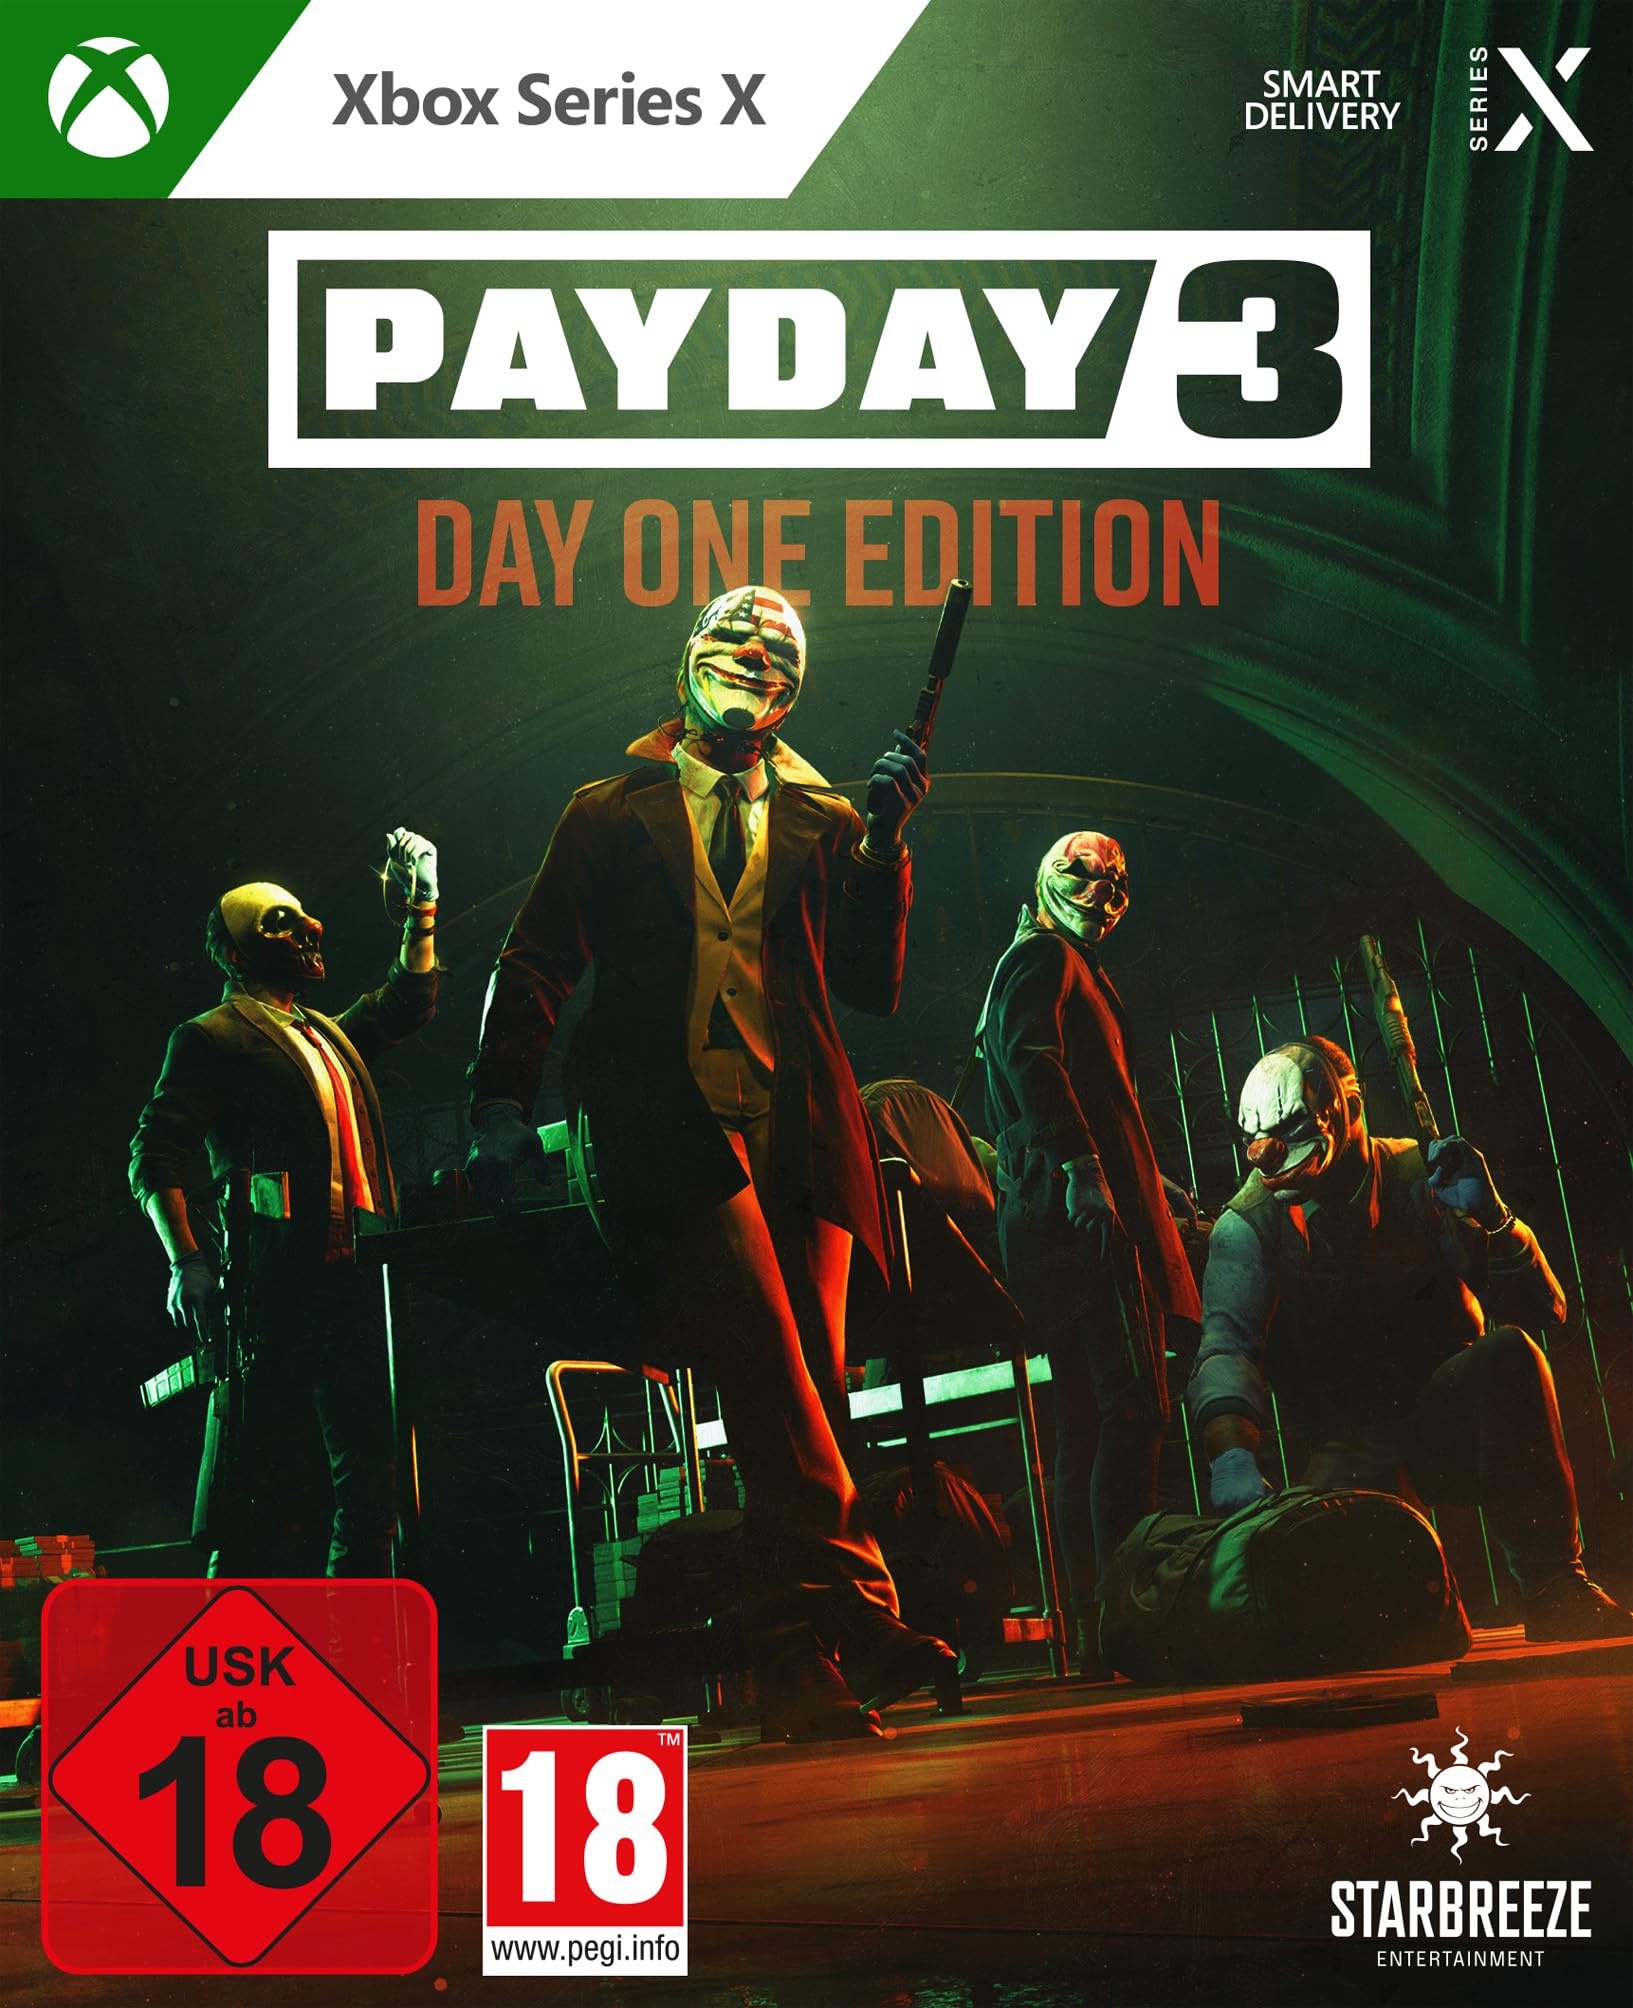 PAYDAY 3 Day One Edition (Xbox Series X)